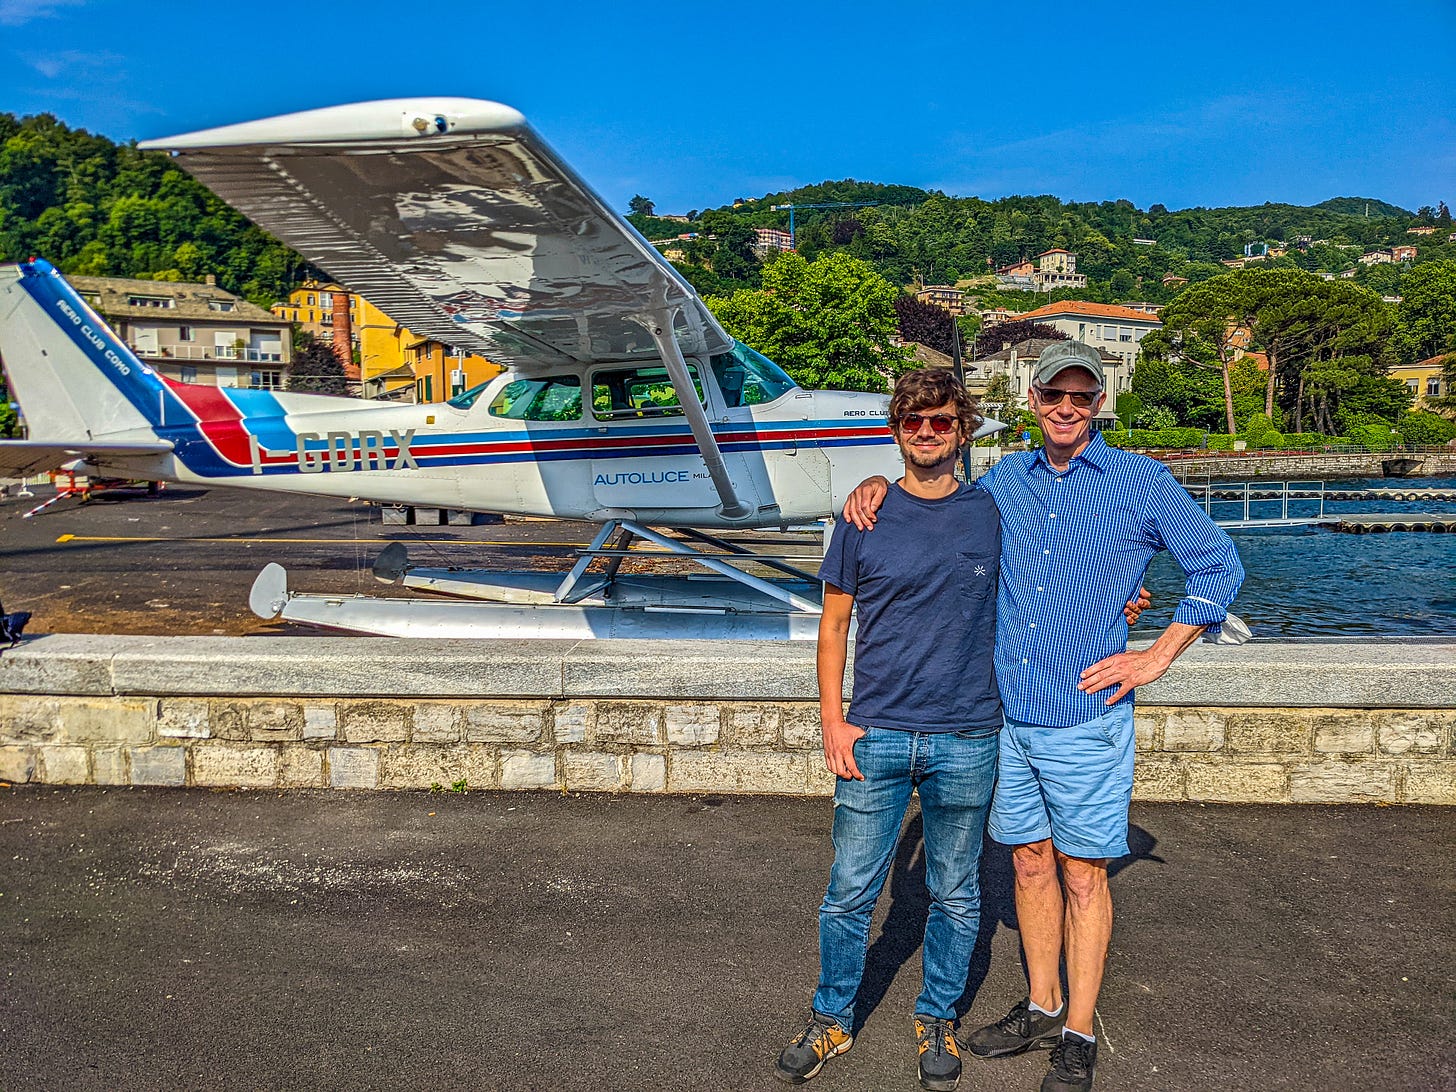 Michael and Javier standing in front of the floatplane, safely on the ground. 